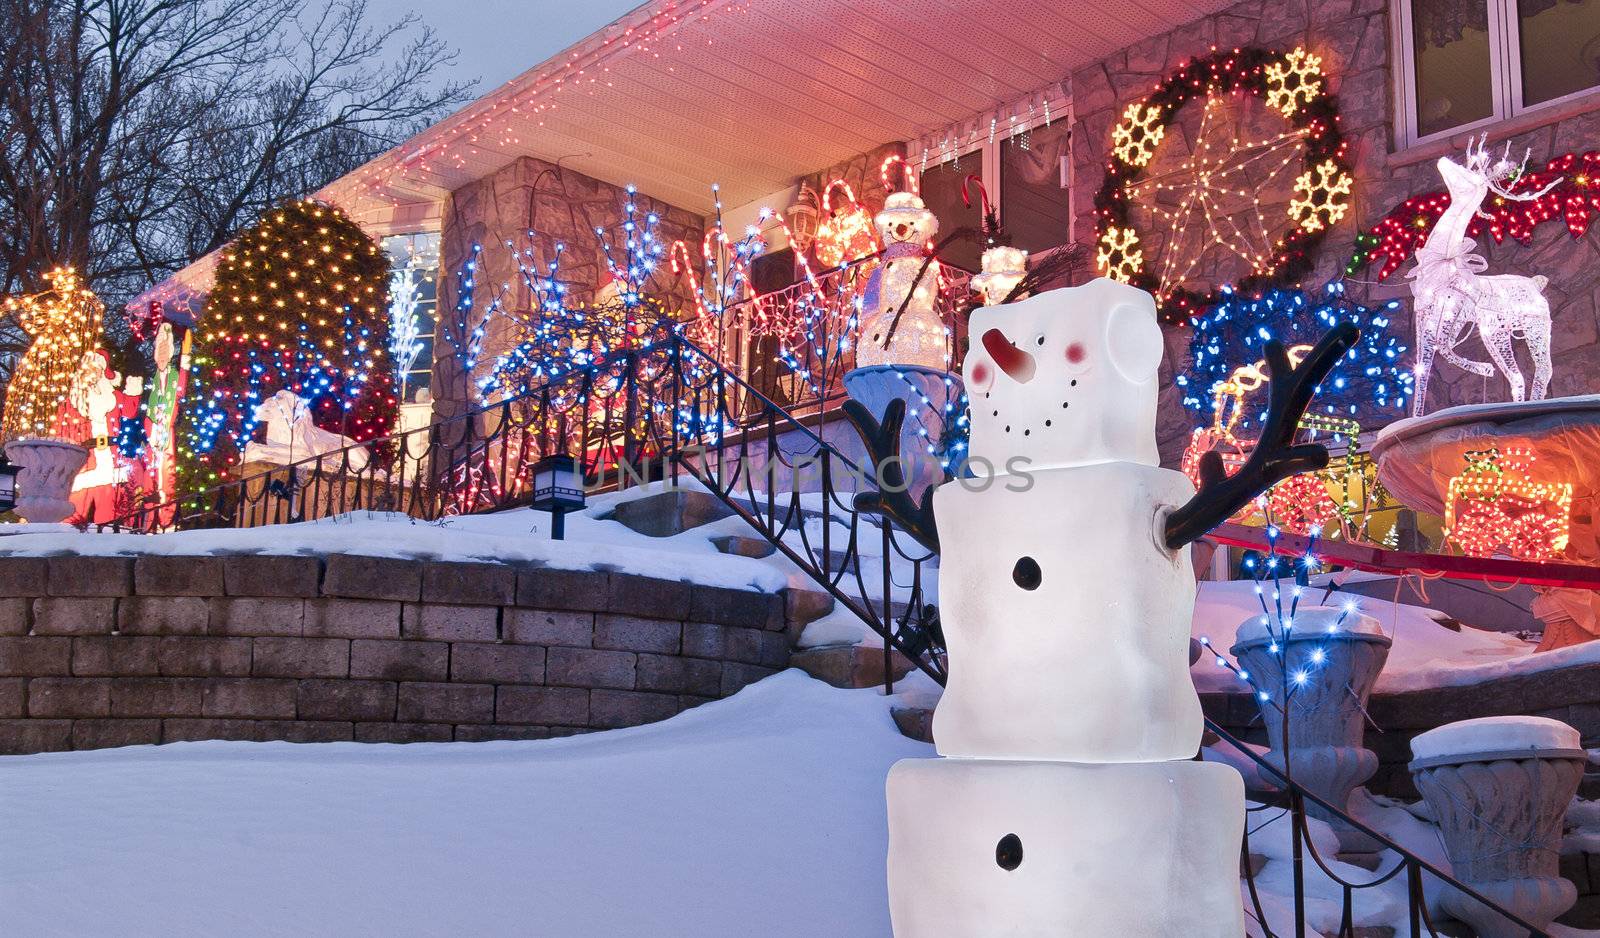 A bungalow is decorated for the Christmas Season with snowmen and much more.